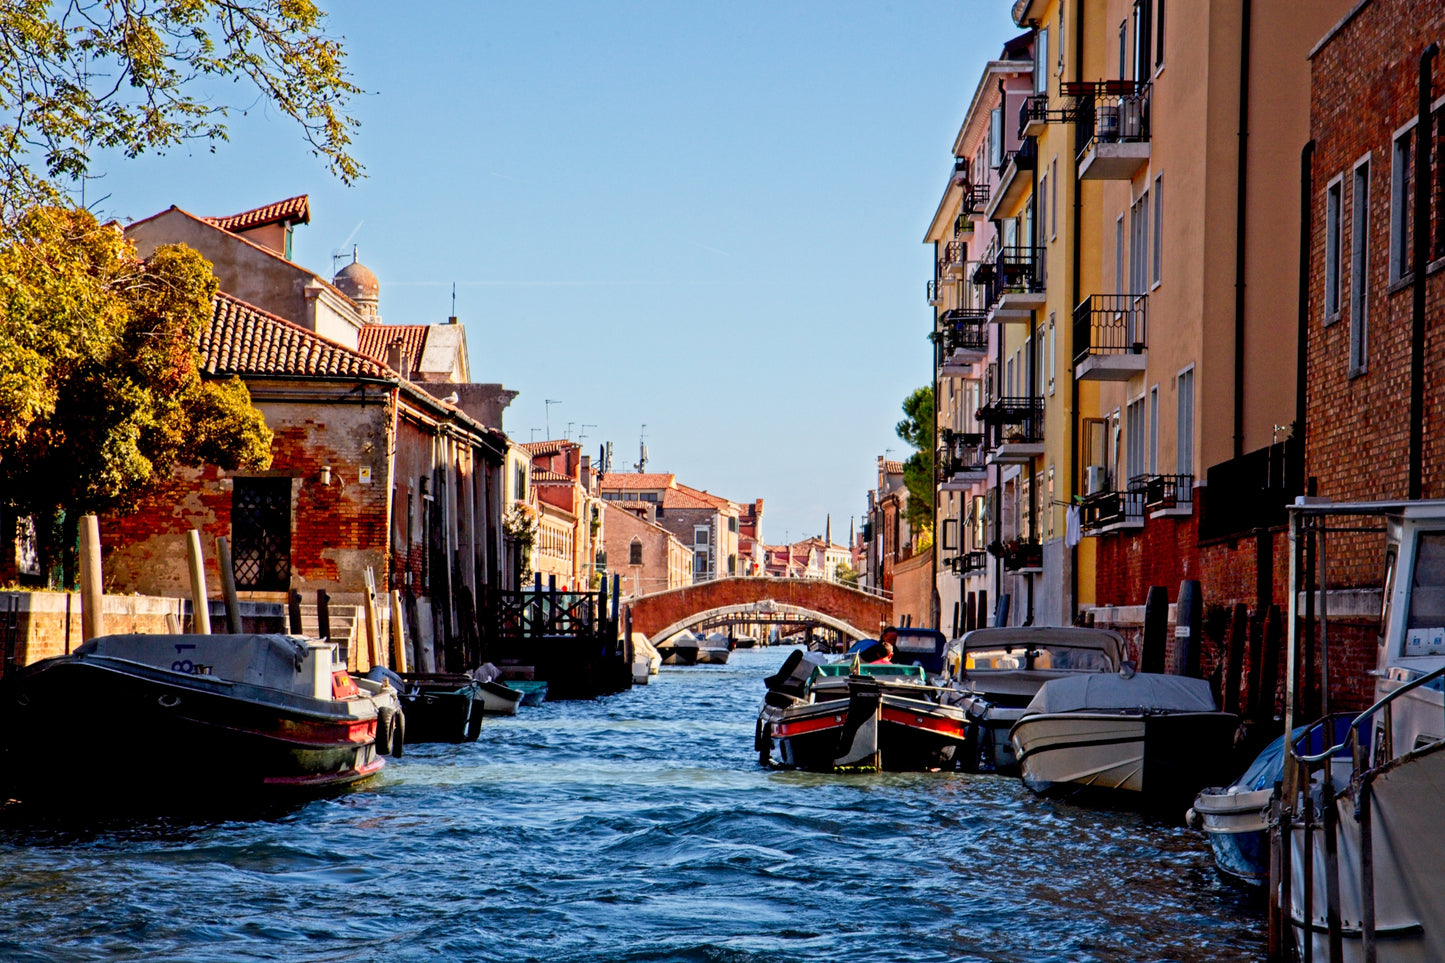 Canals of Venice 6959 by LARRY HAMPTON